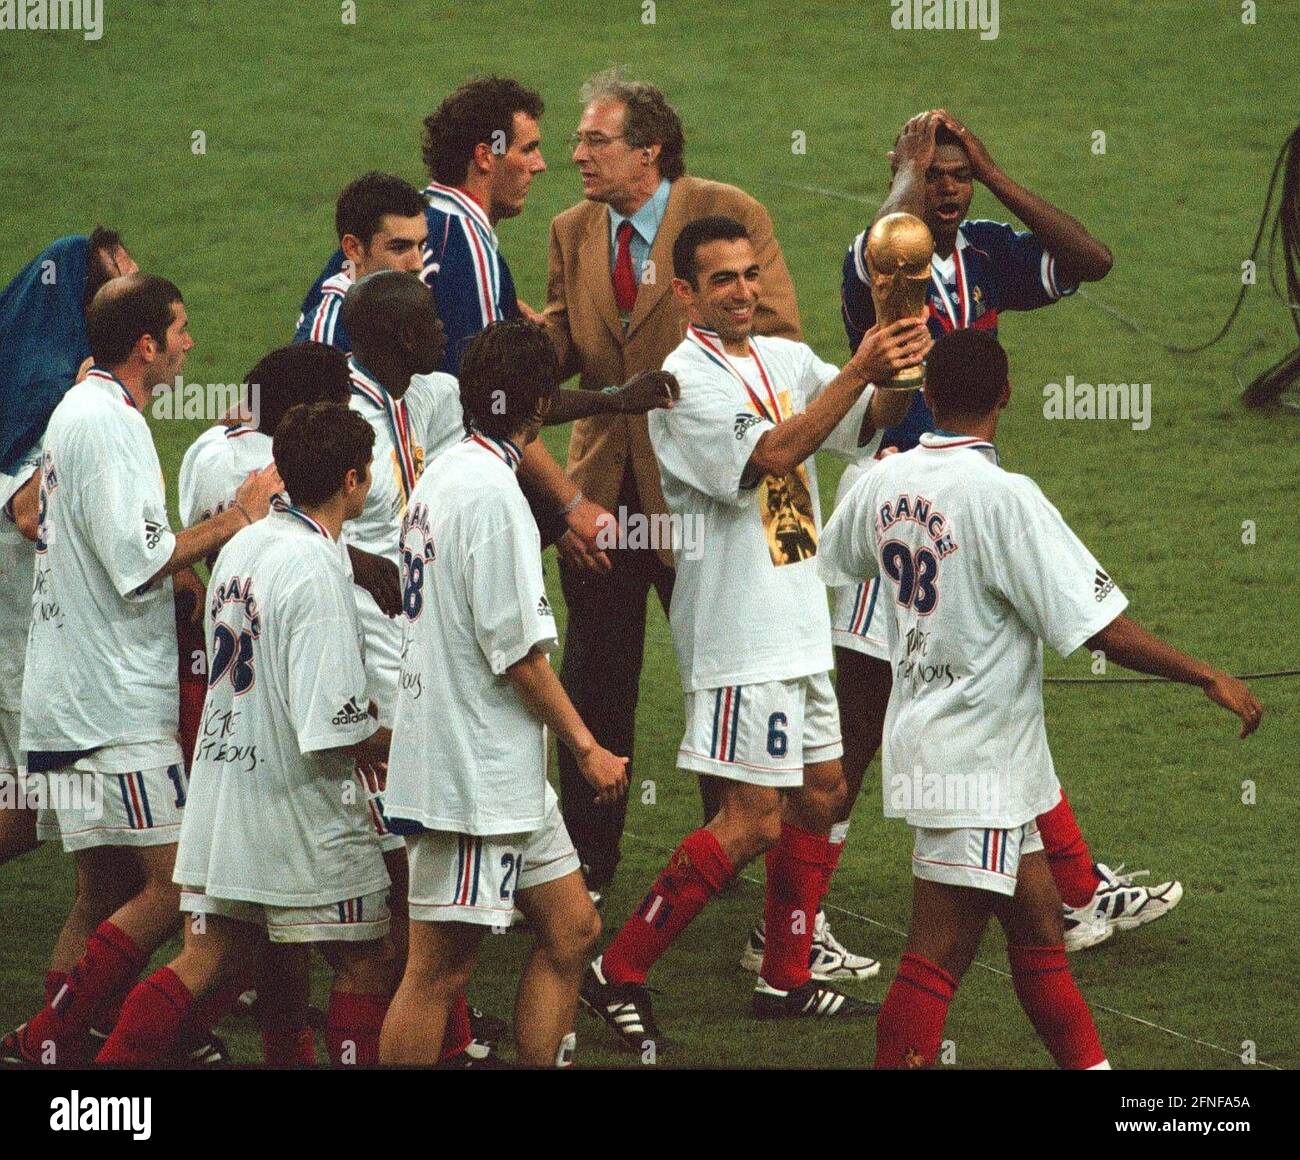 Date of recording: 12.07.1998 YOURI DJORKAEFF PRESENTS THE CUP AFTER THE WORLD CUP FINAL AGAINST BRAZIL ON 12.07.98 AT THE STADE DE FRANCE, PARIS. [automated translation] Stock Photo